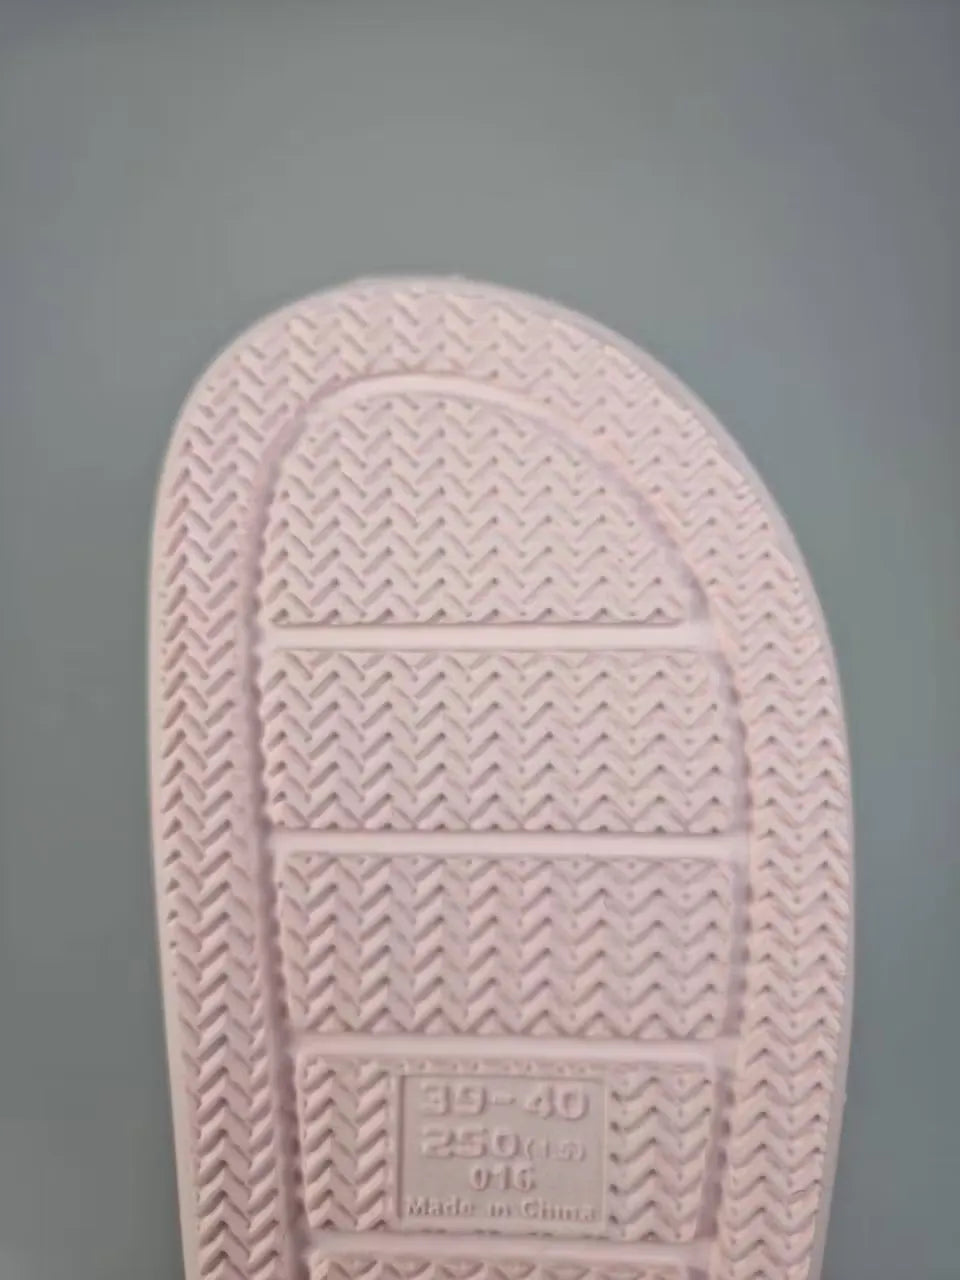 Light pink Summar slippers for women, featuring a plush memory foam footbed and flexible sole. Ideal for indoor and outdoor comfort.